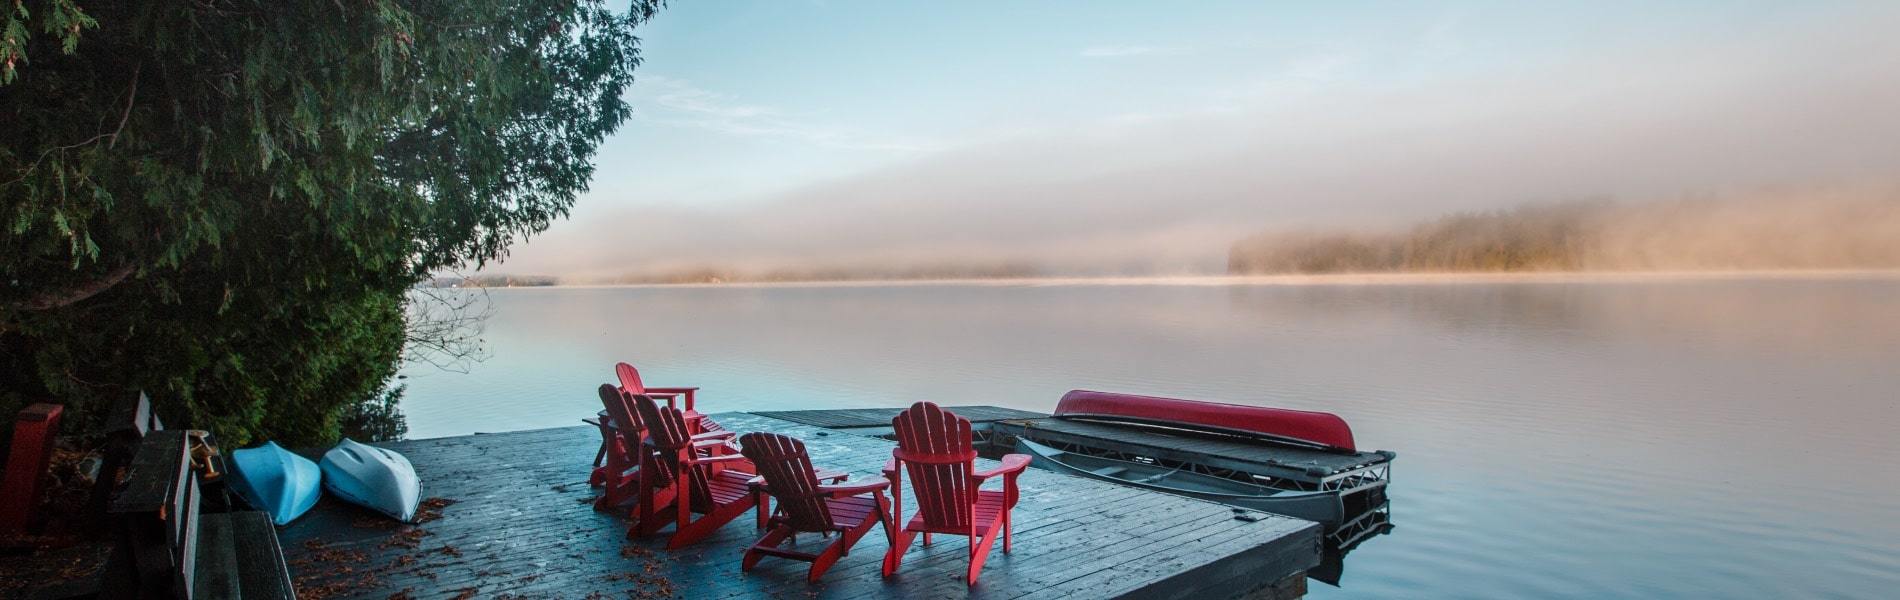 View of dock chairs overlooking an Ontario lake.